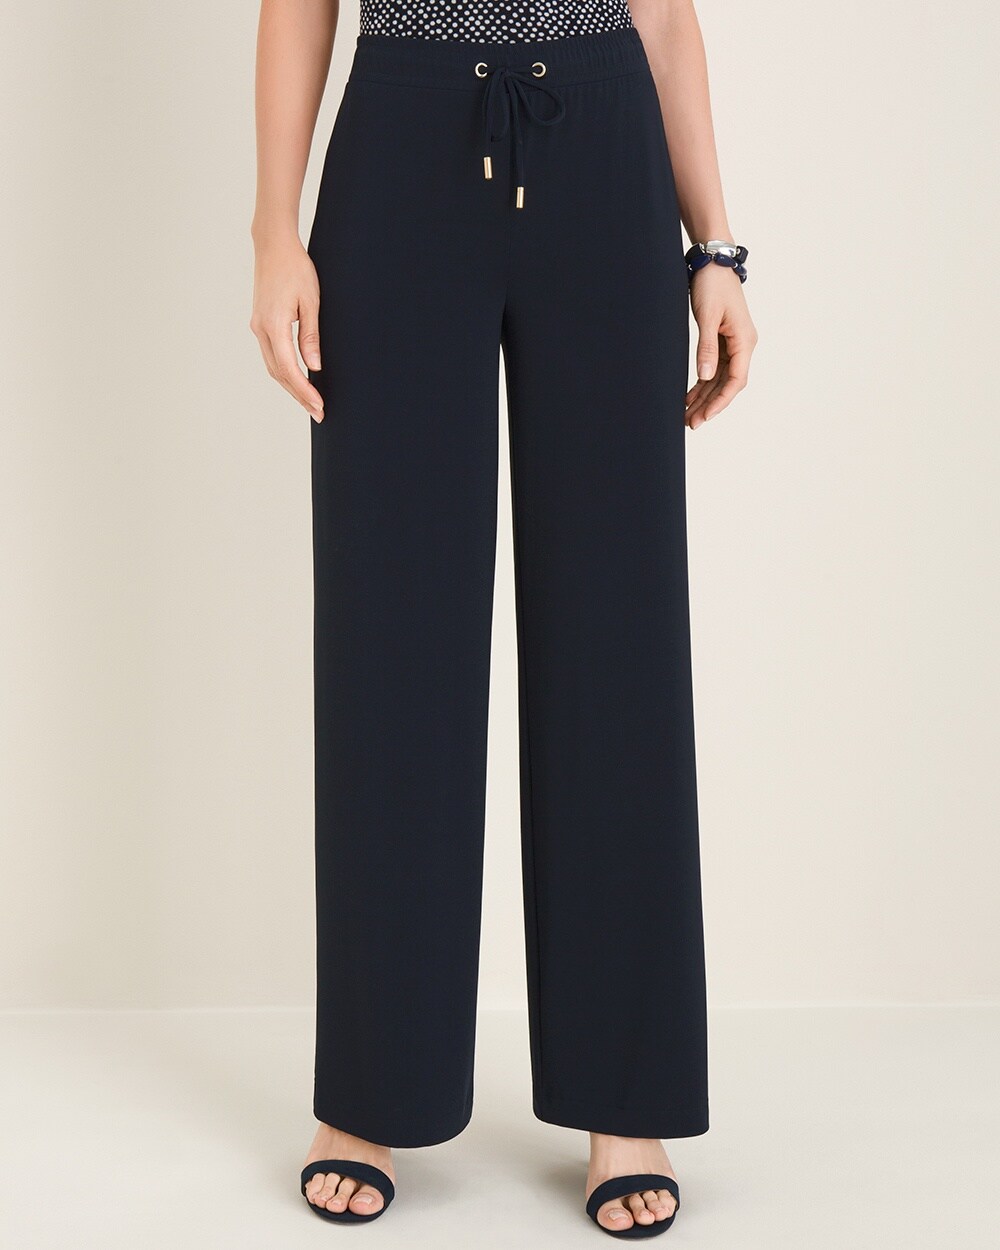 Travelers Collection Jersey Pants